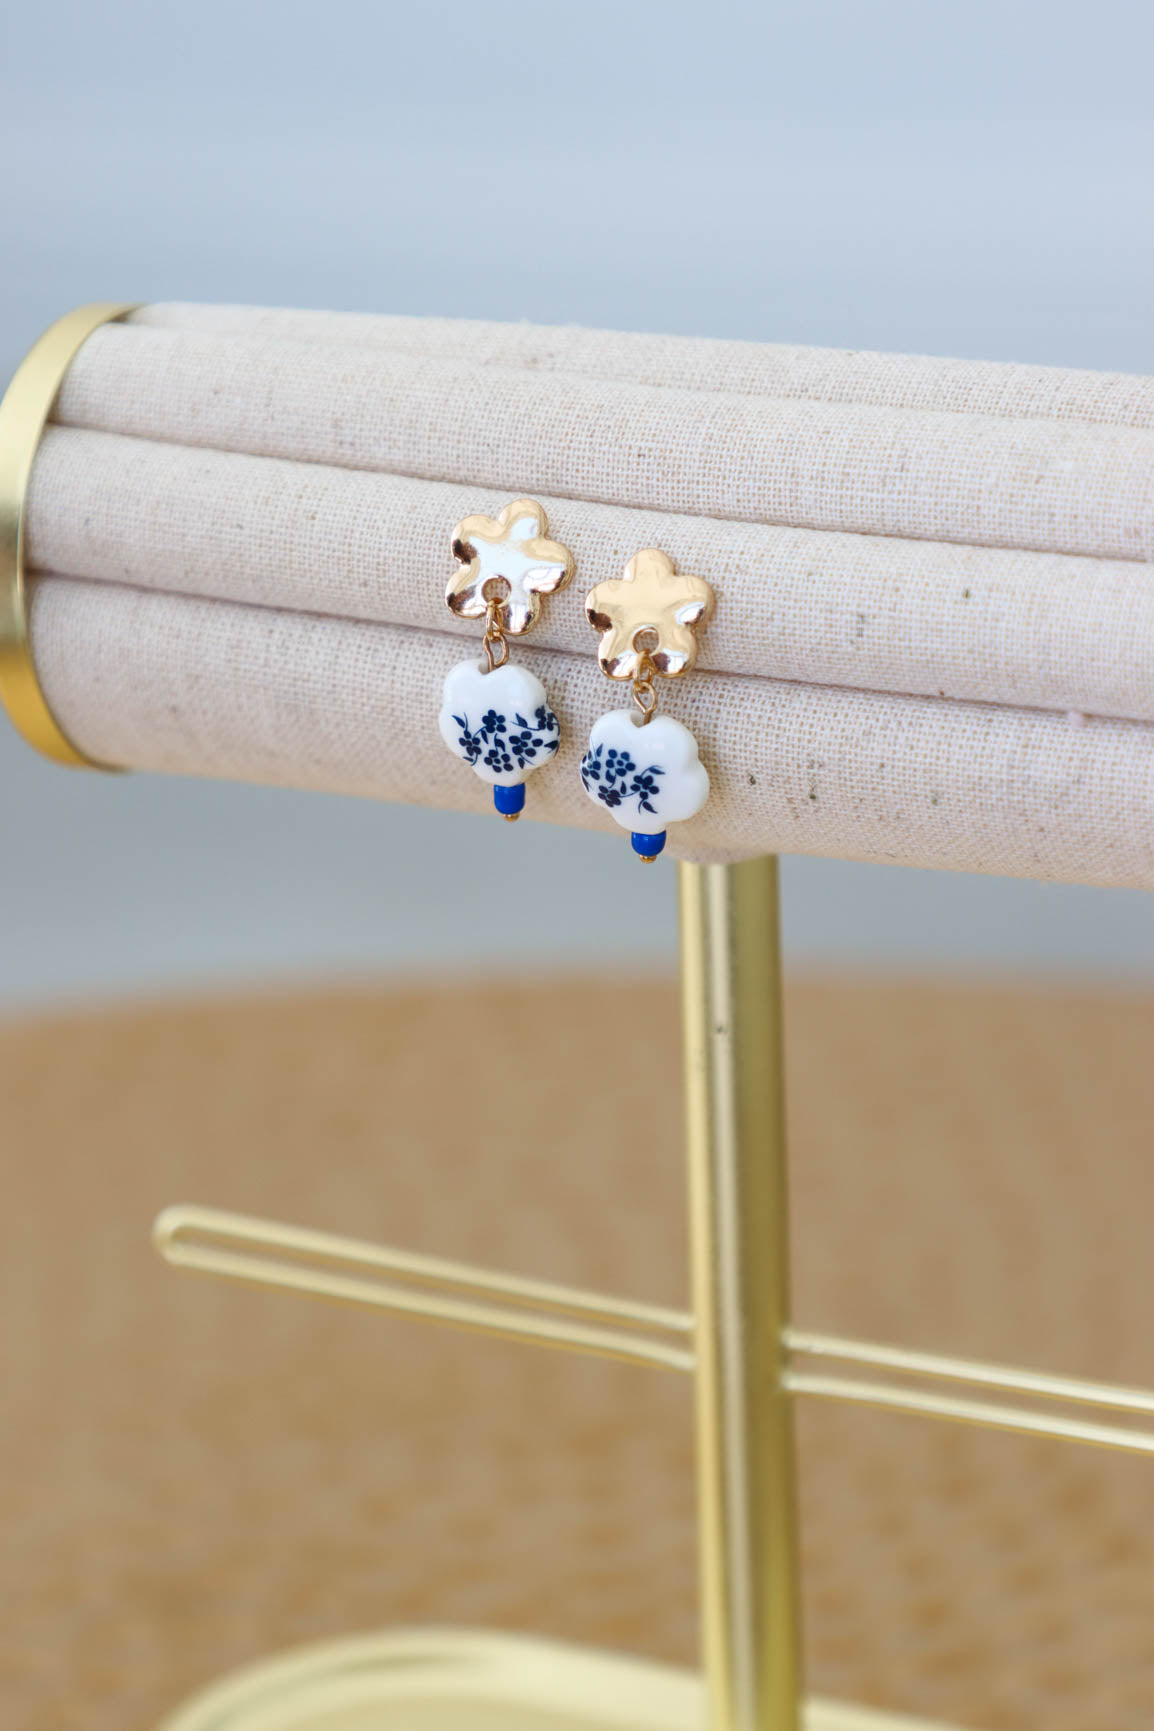 earrings with white and blue porcelain charm